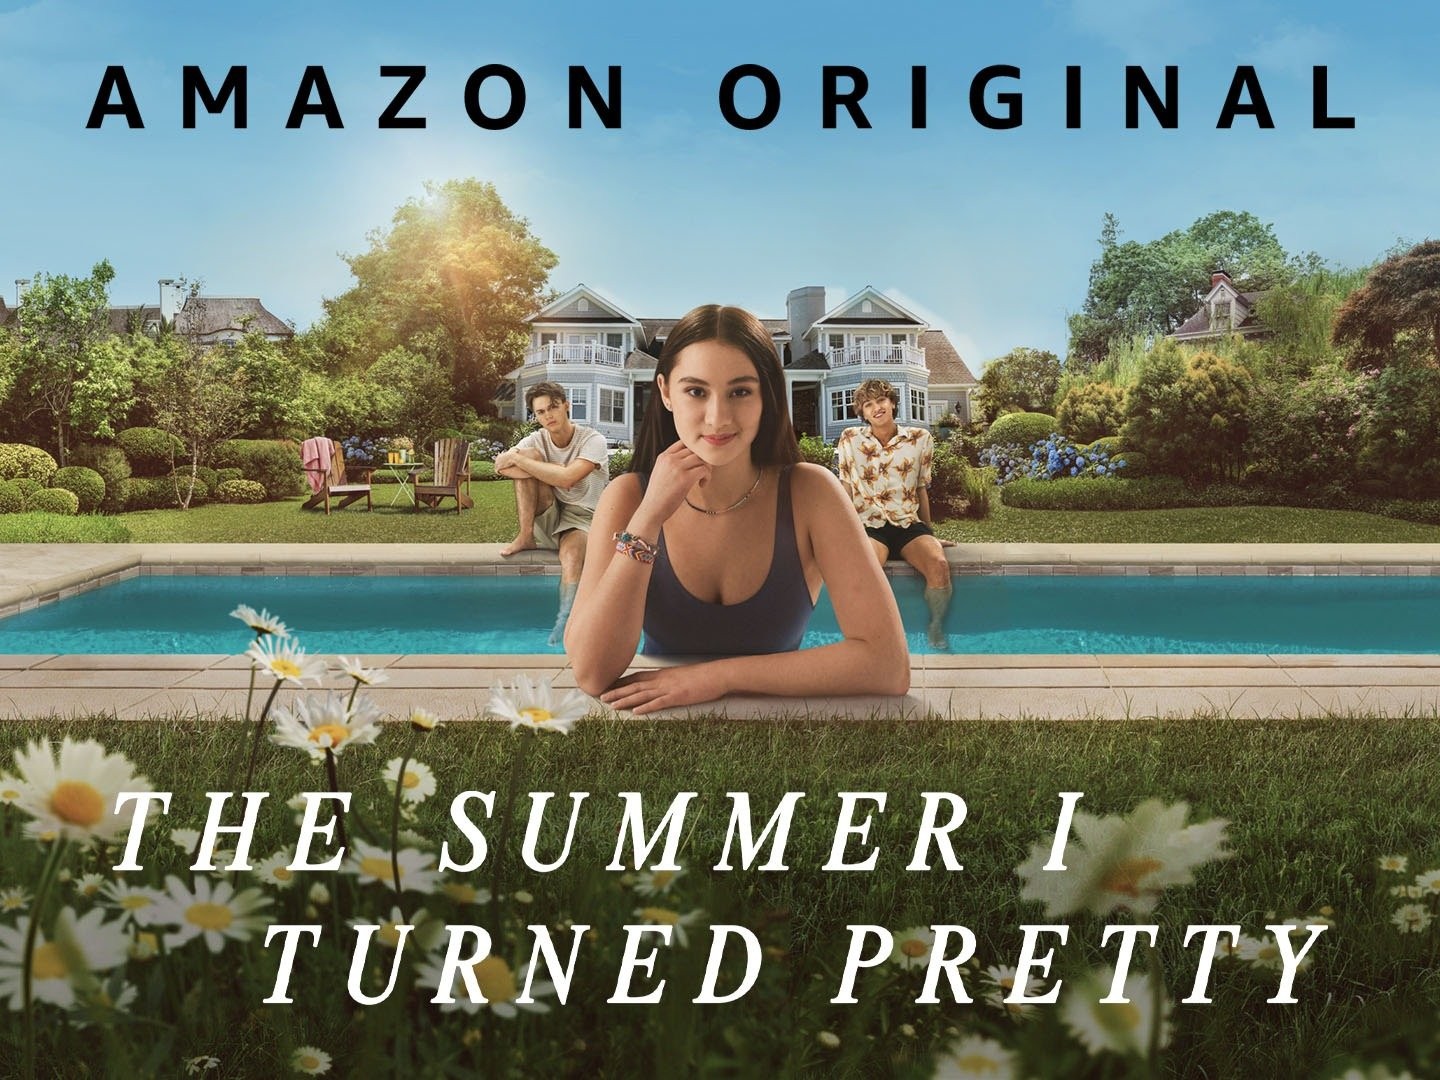 5 Reasons “The Summer I Turned Pretty” TV Show is Less Problematic than the  Book